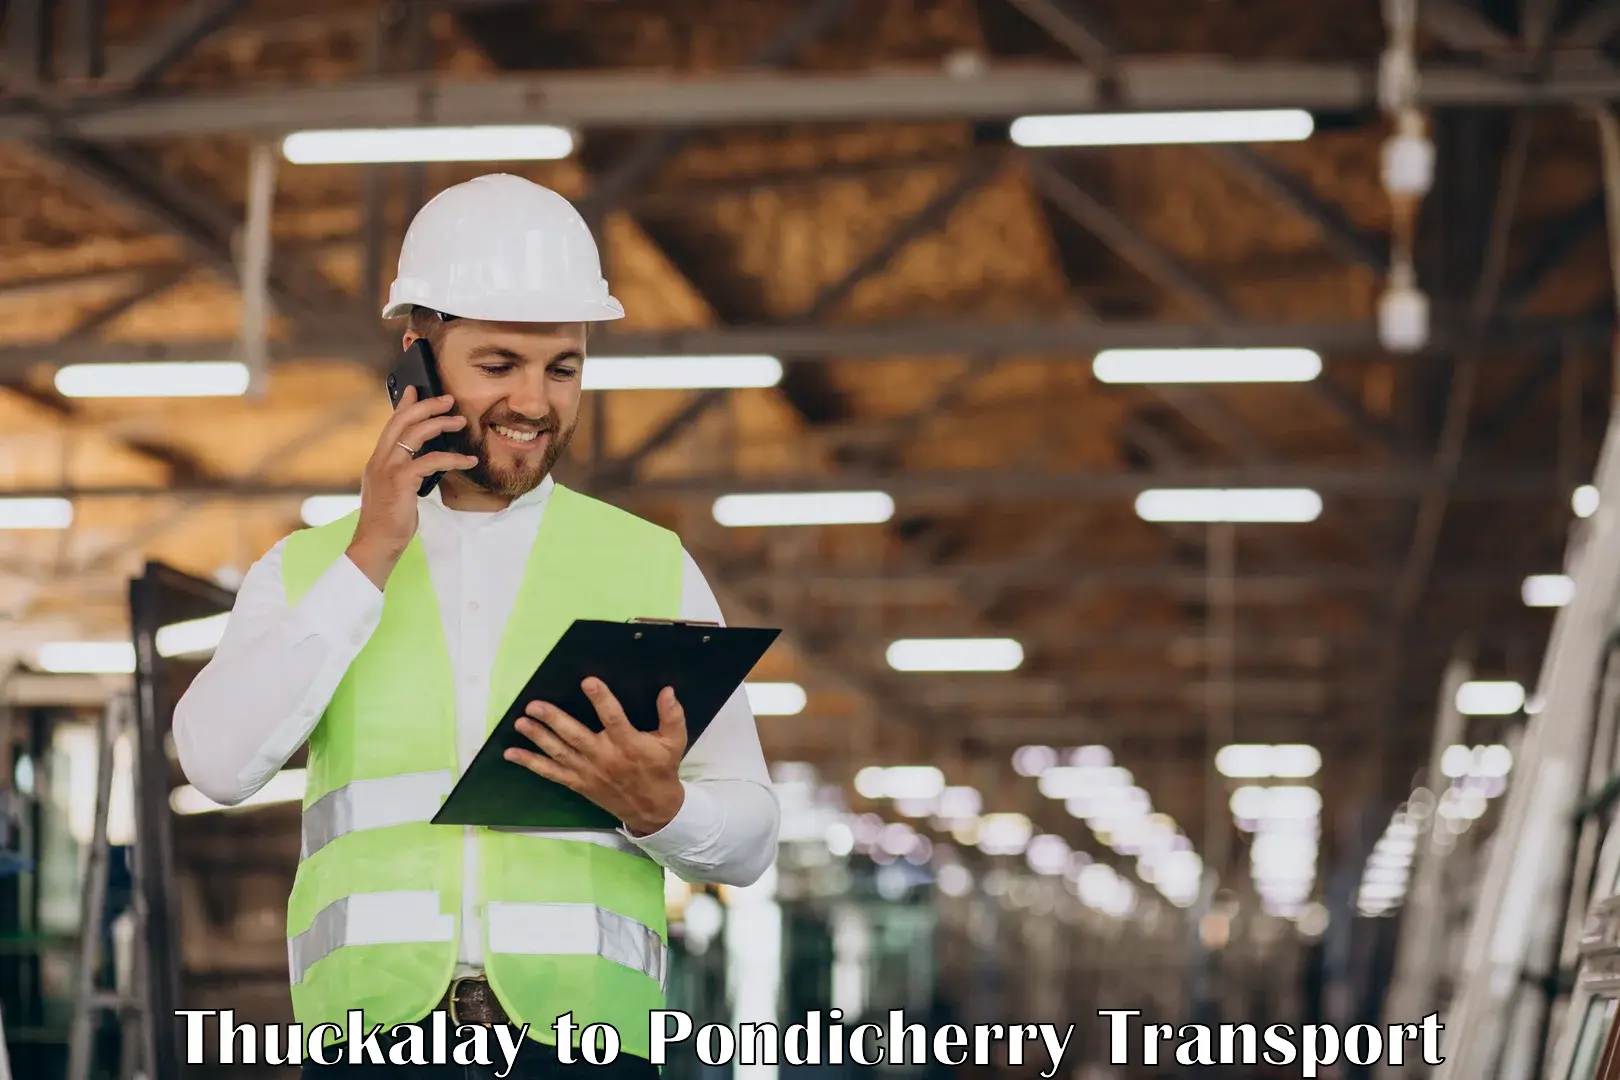 Truck transport companies in India Thuckalay to Pondicherry